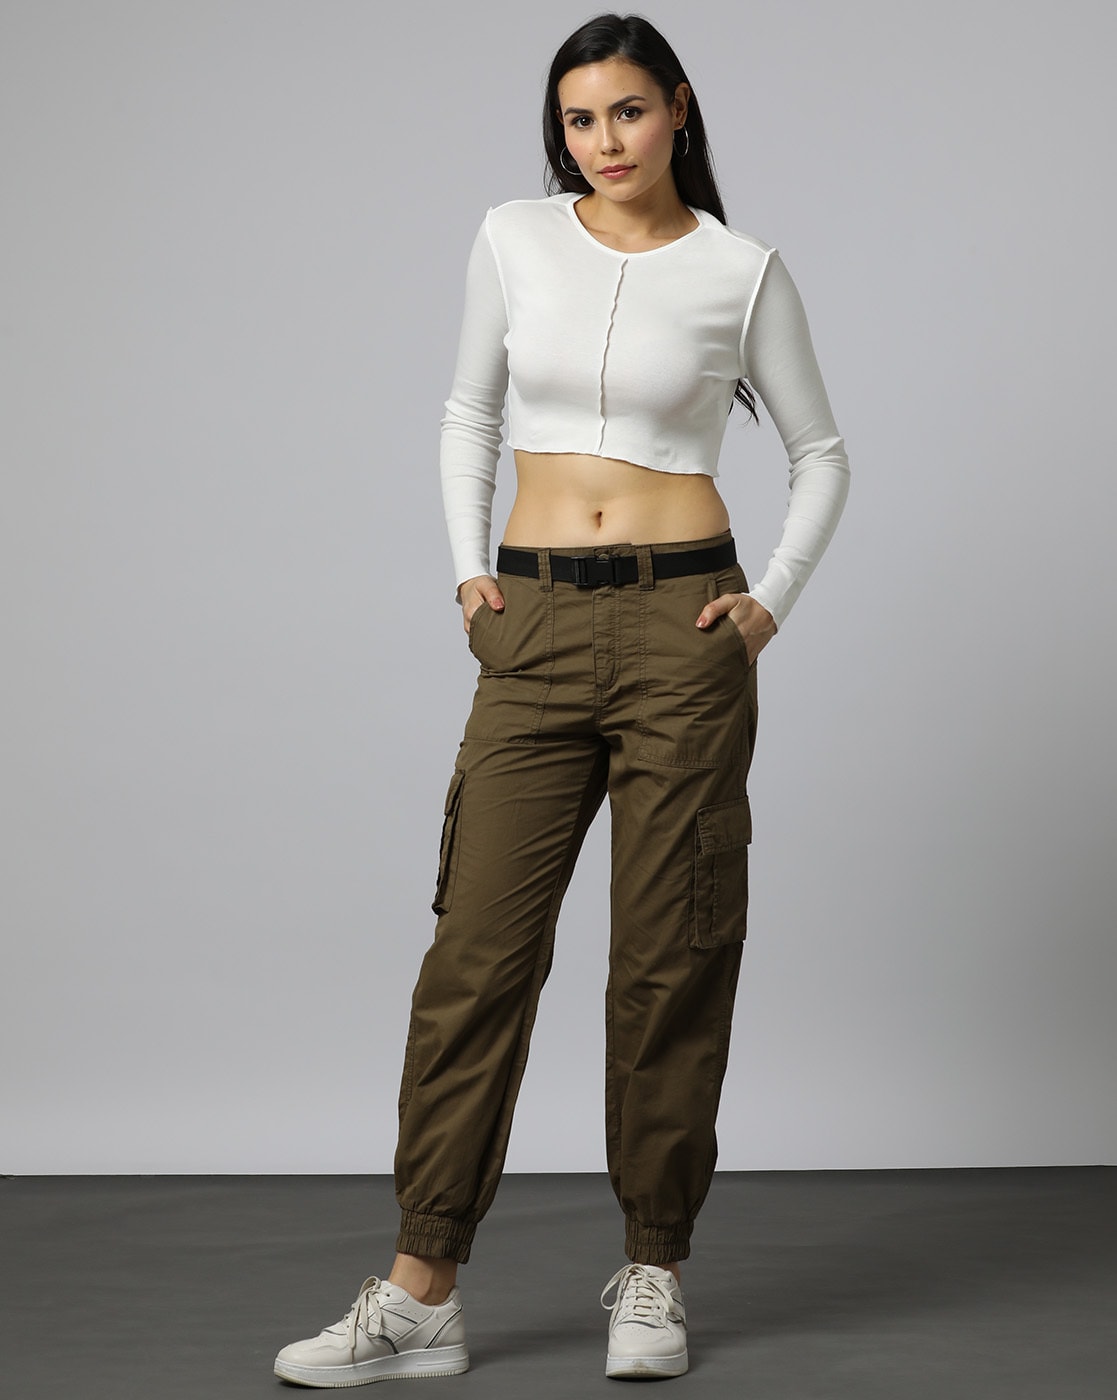 EDCRF High Waisted Cargo Pants Women Relaxed Fit Athletic India